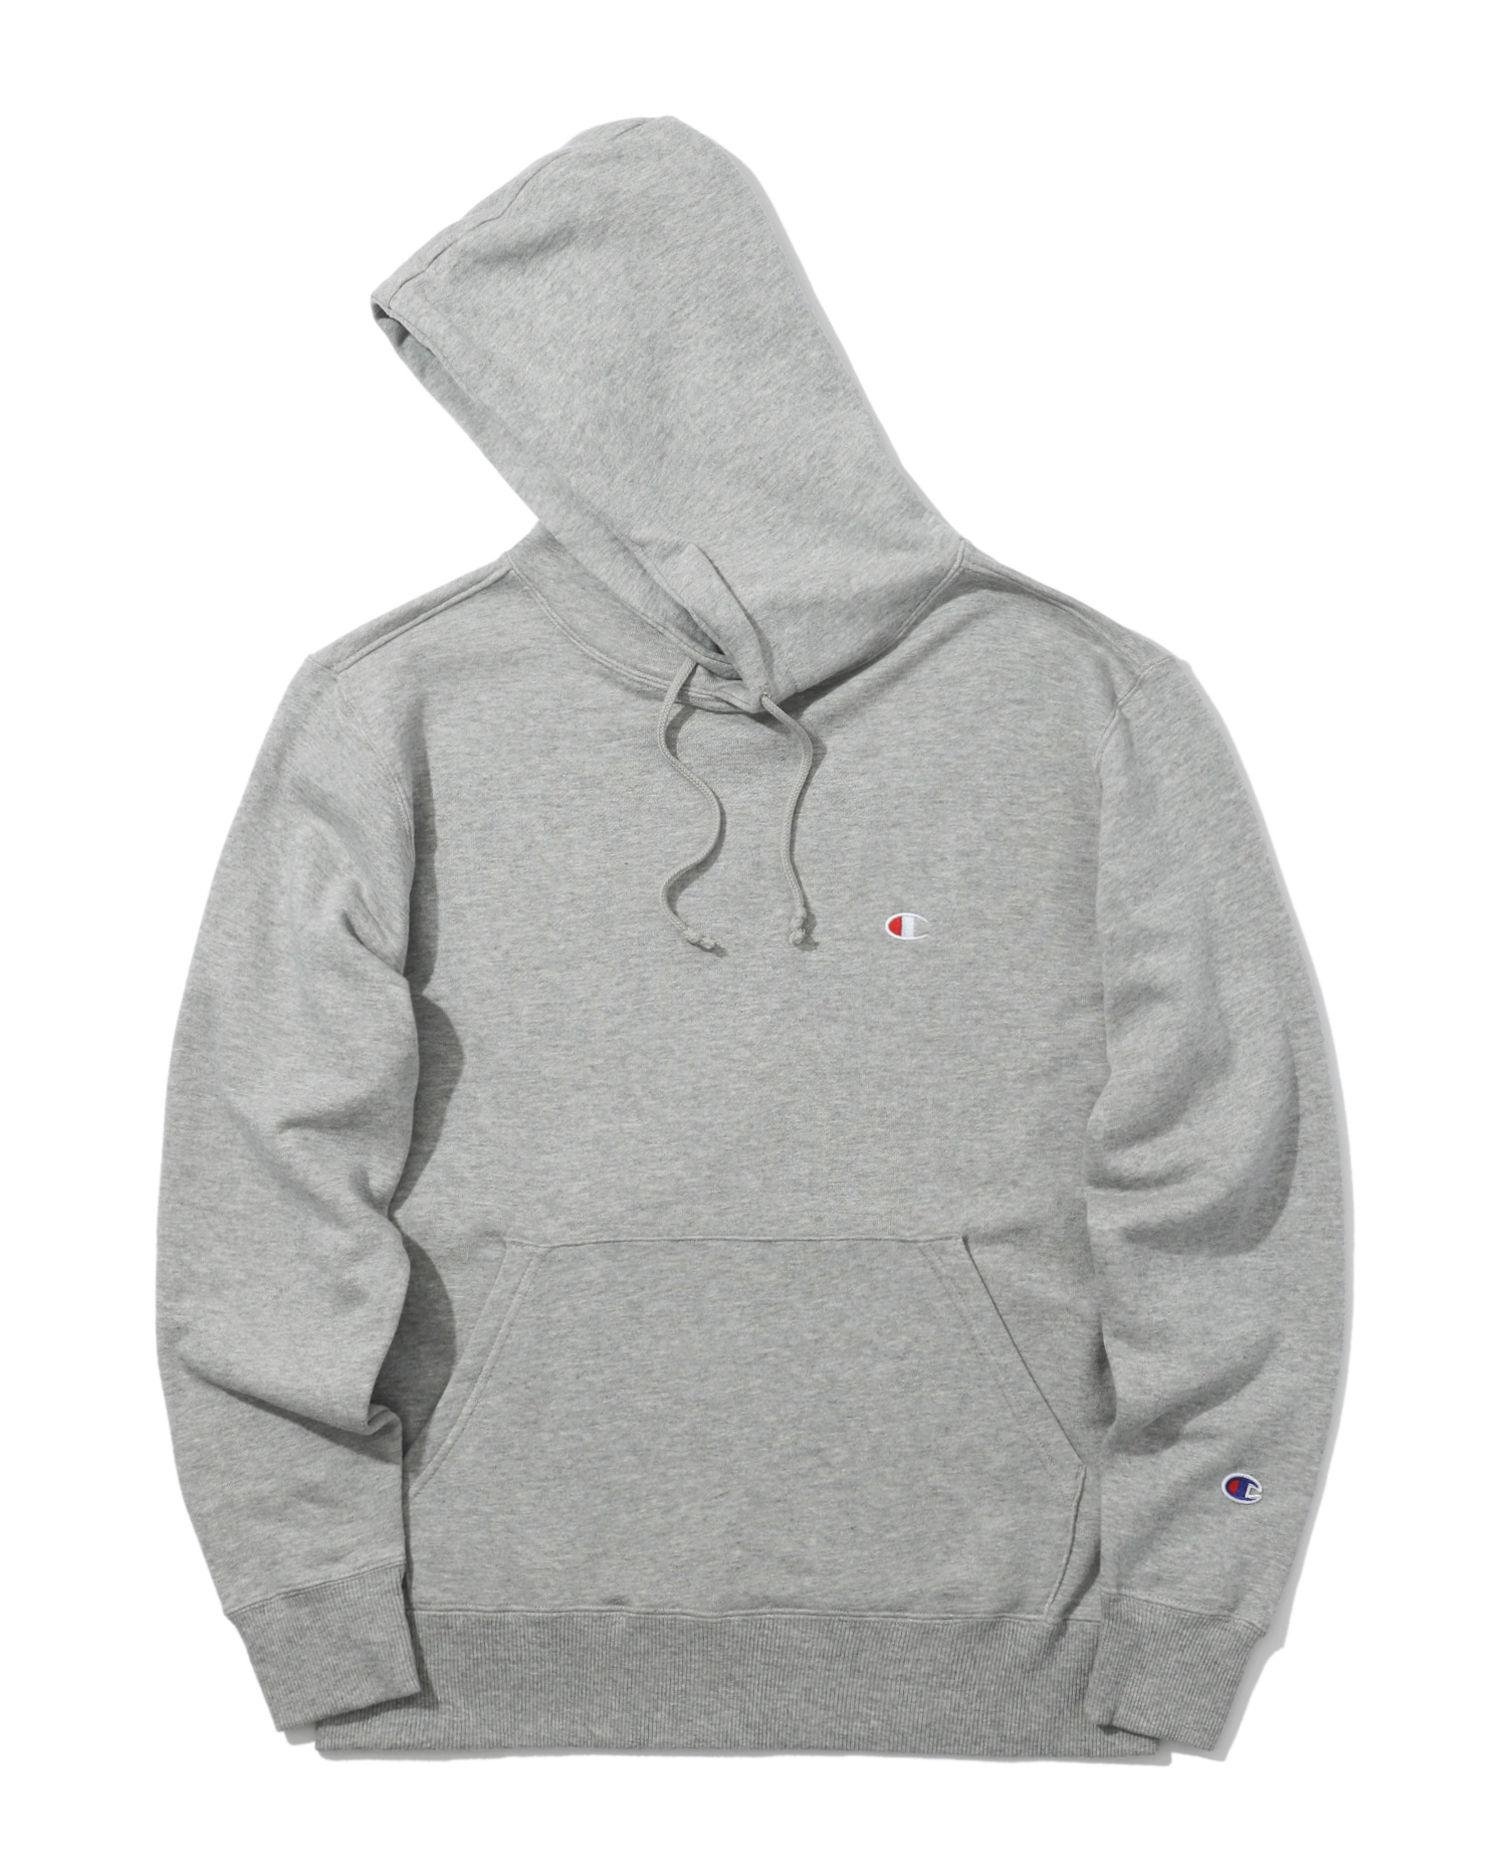 Logo hoodie by CHAMPION